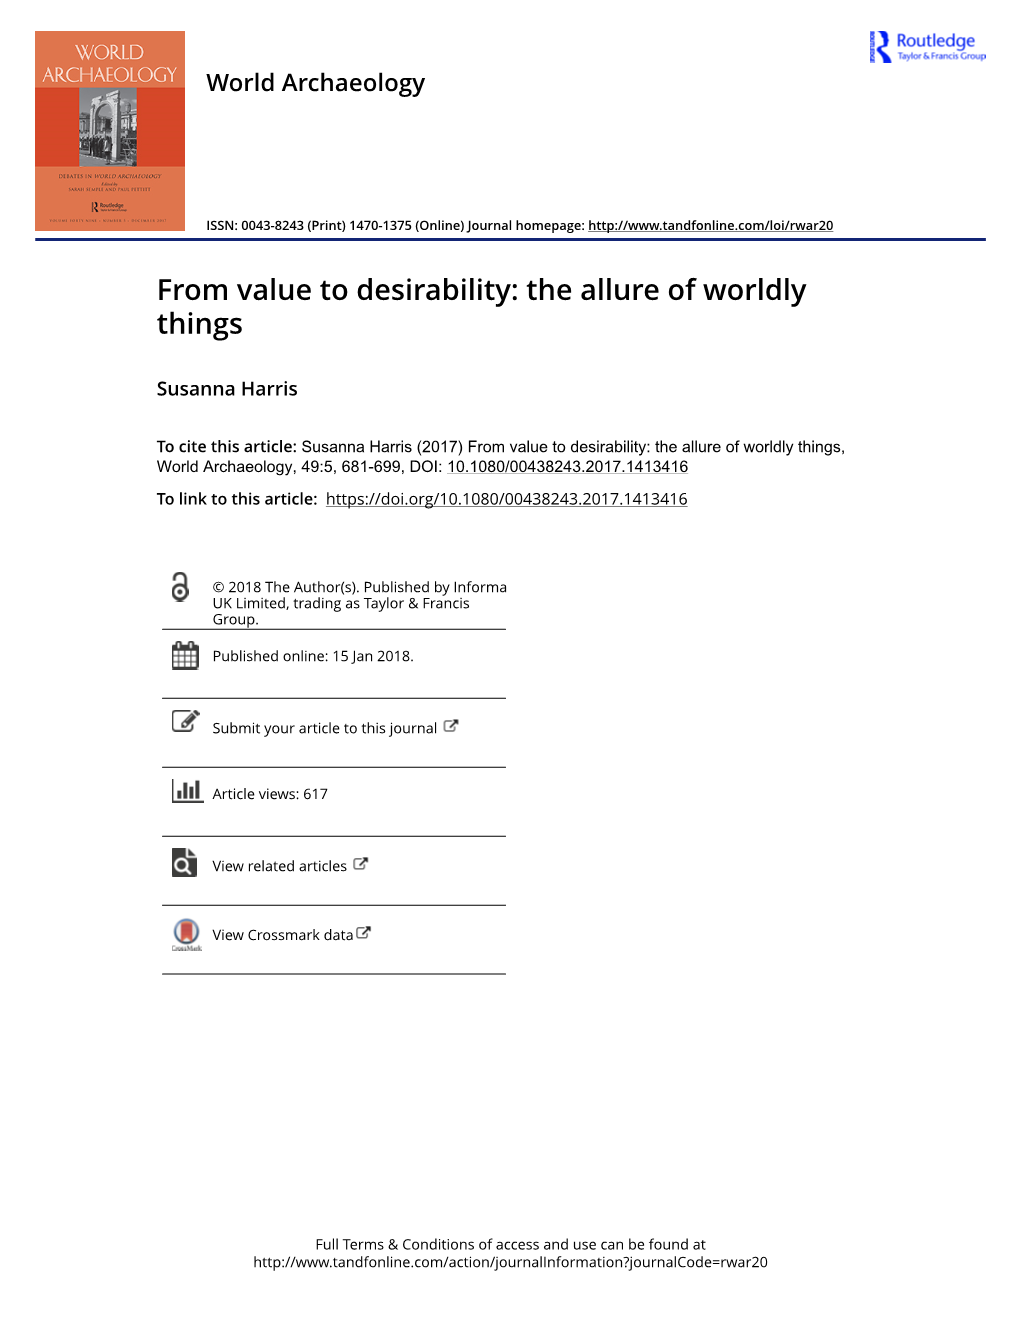 From Value to Desirability: the Allure of Worldly Things